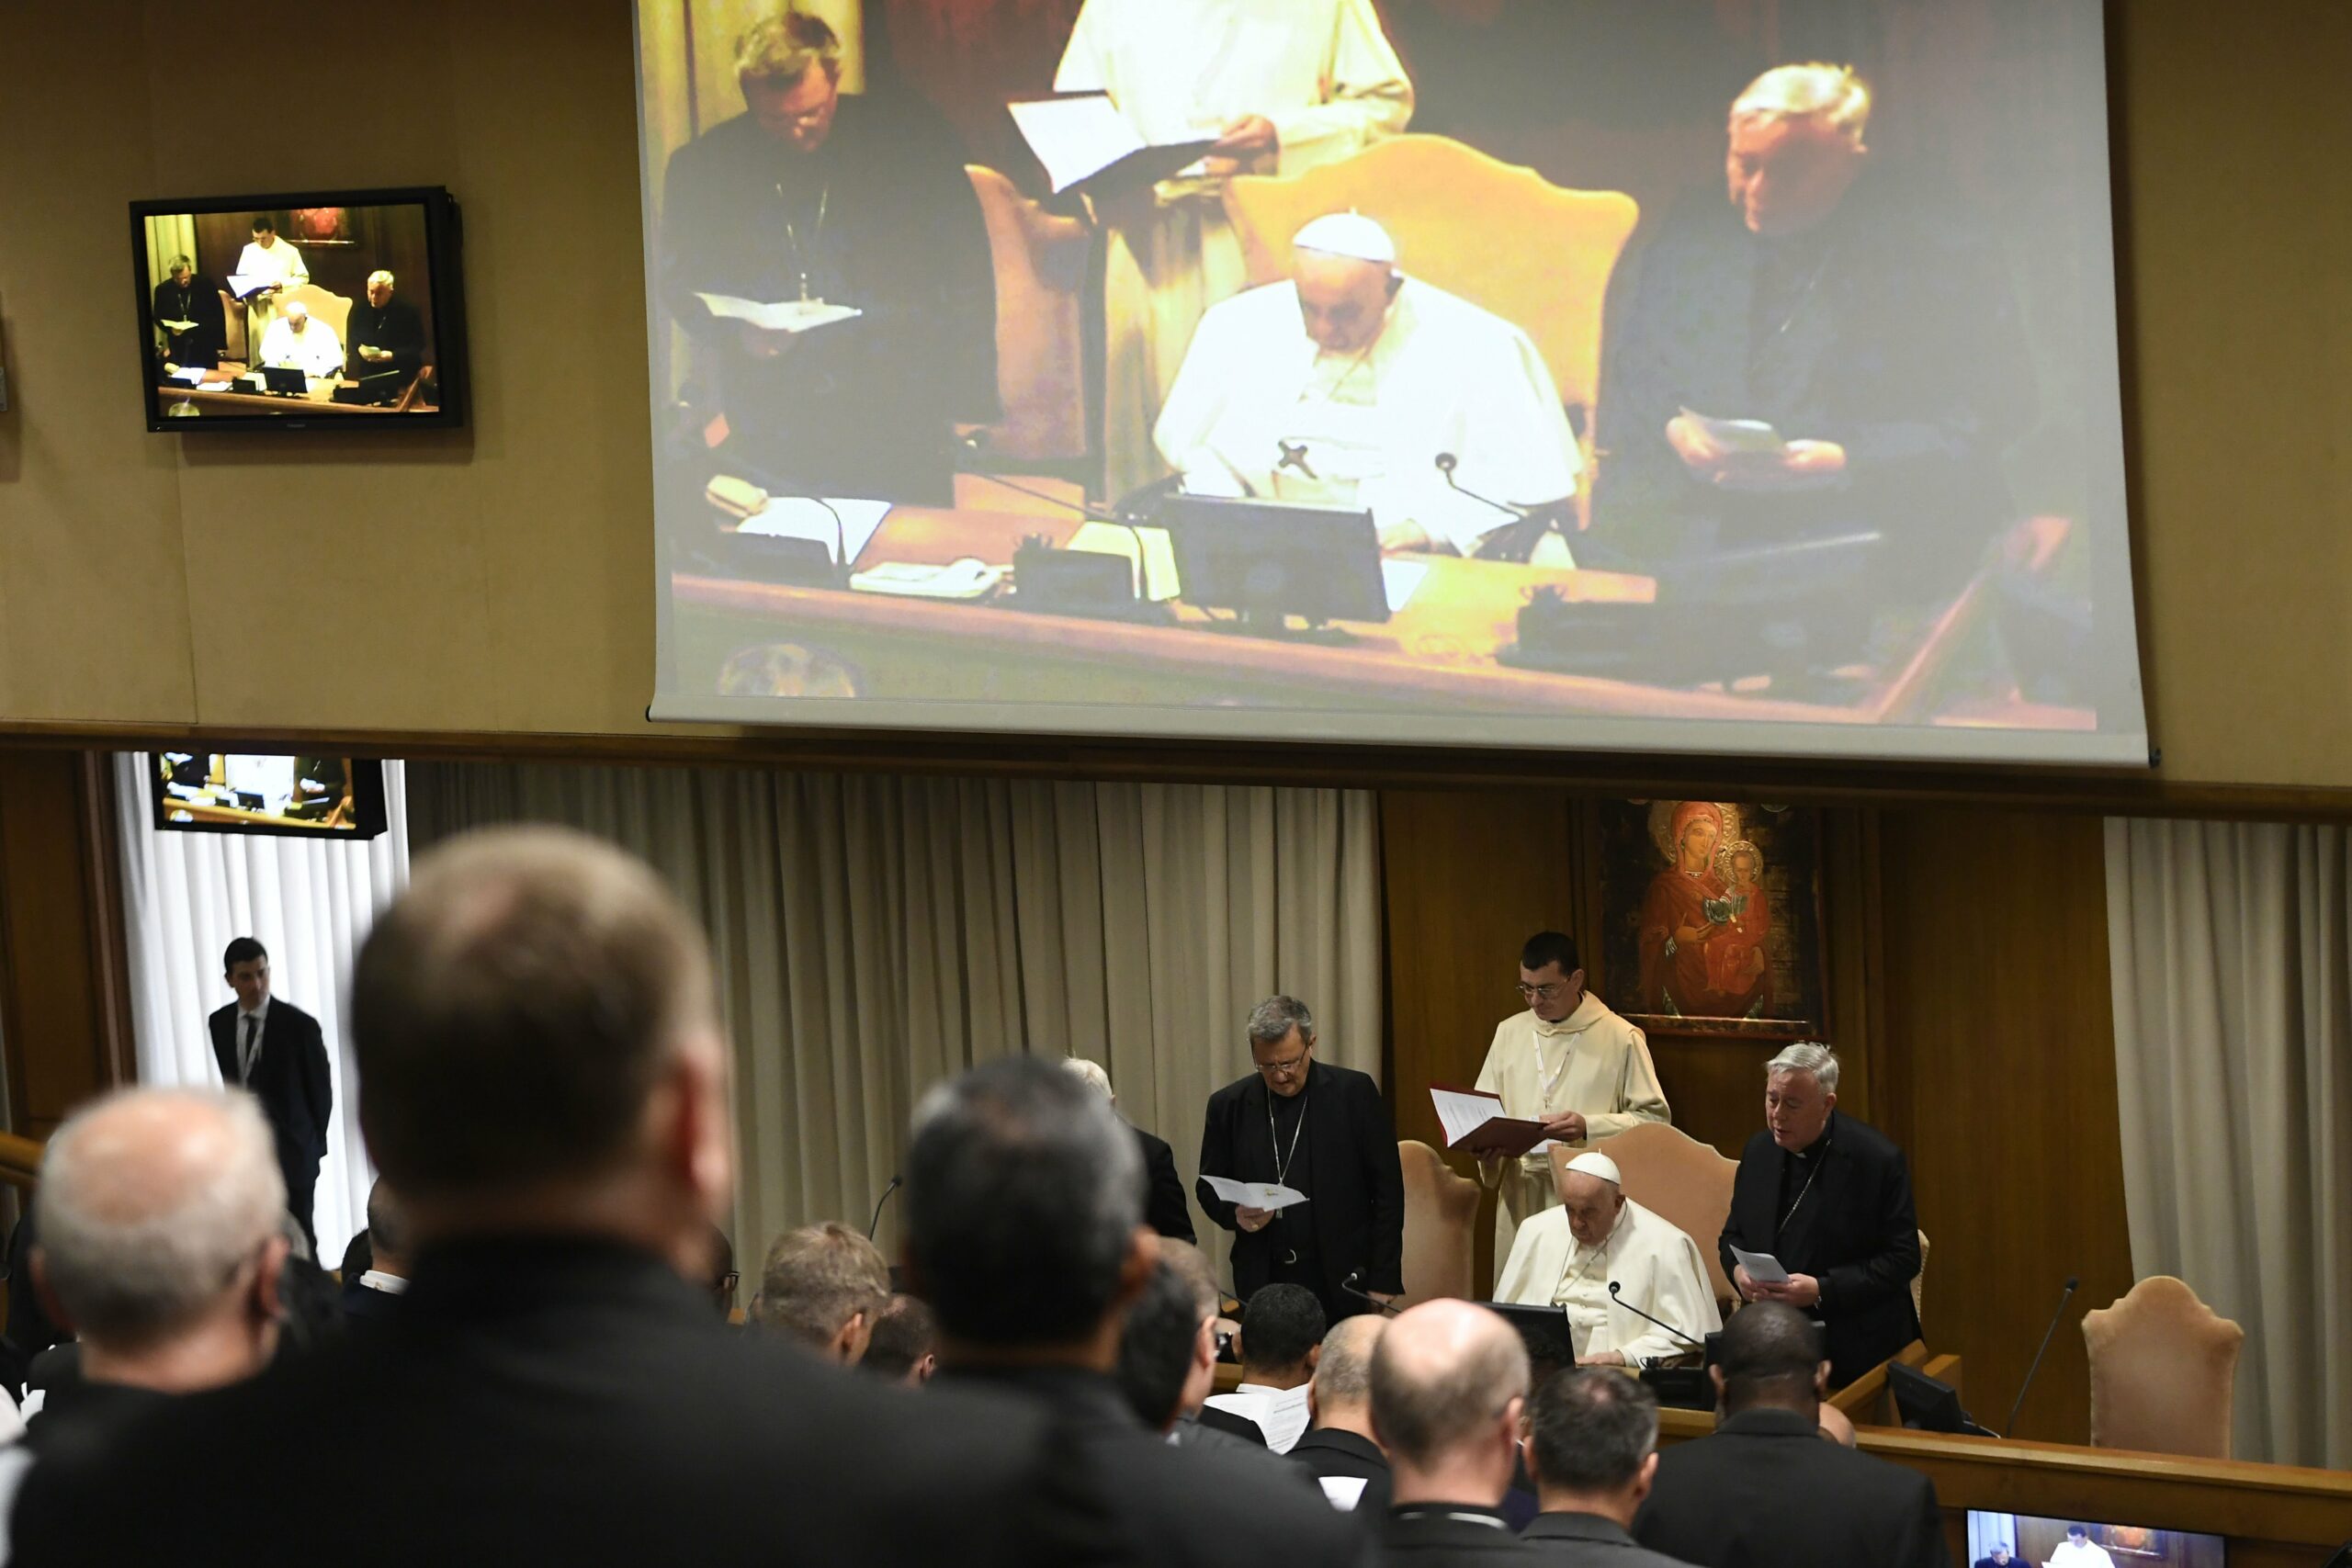 Synodal style can free pastors to focus on ministry, pope says